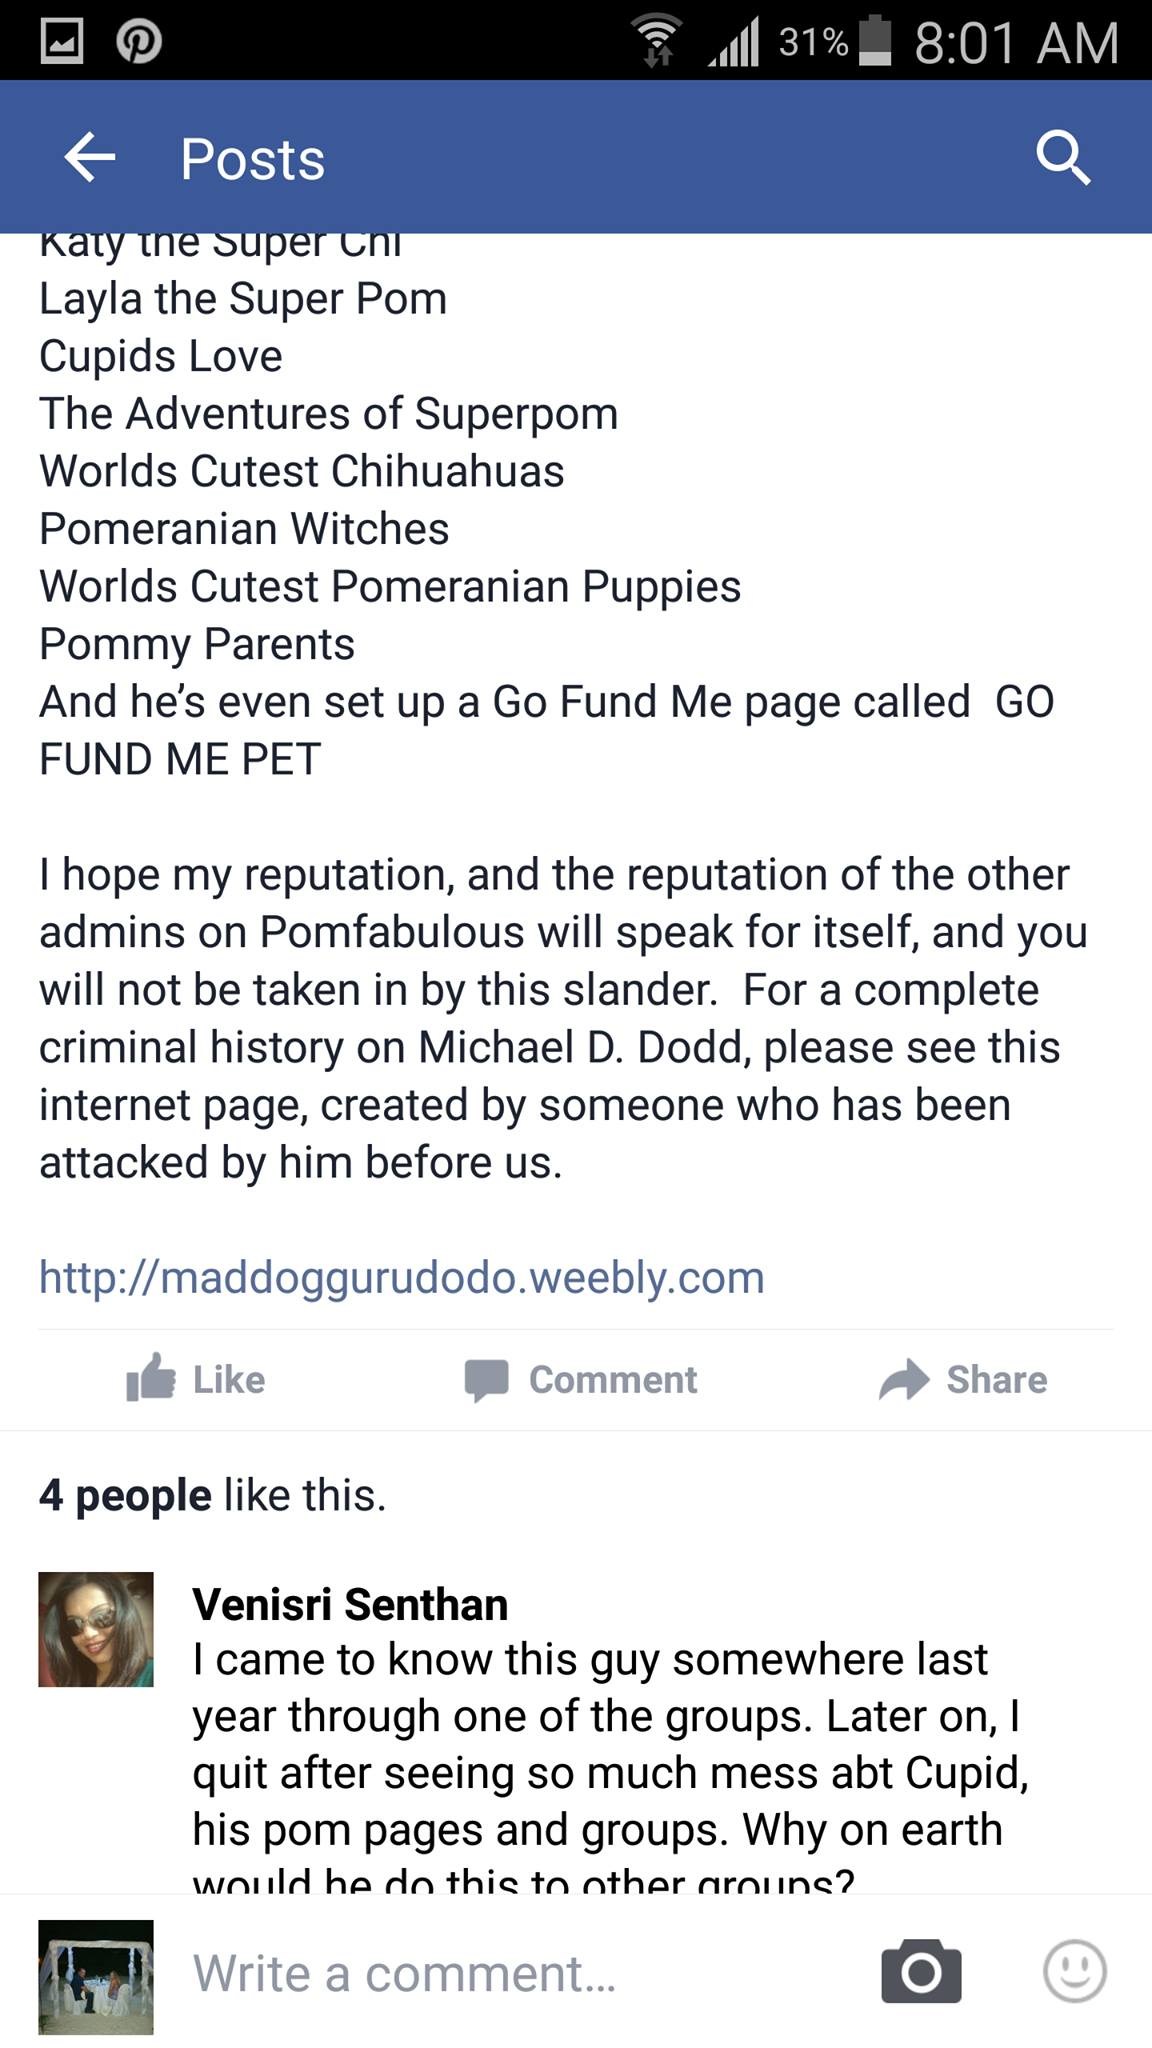 Randy Boles share web page suggesting to harm Dogs